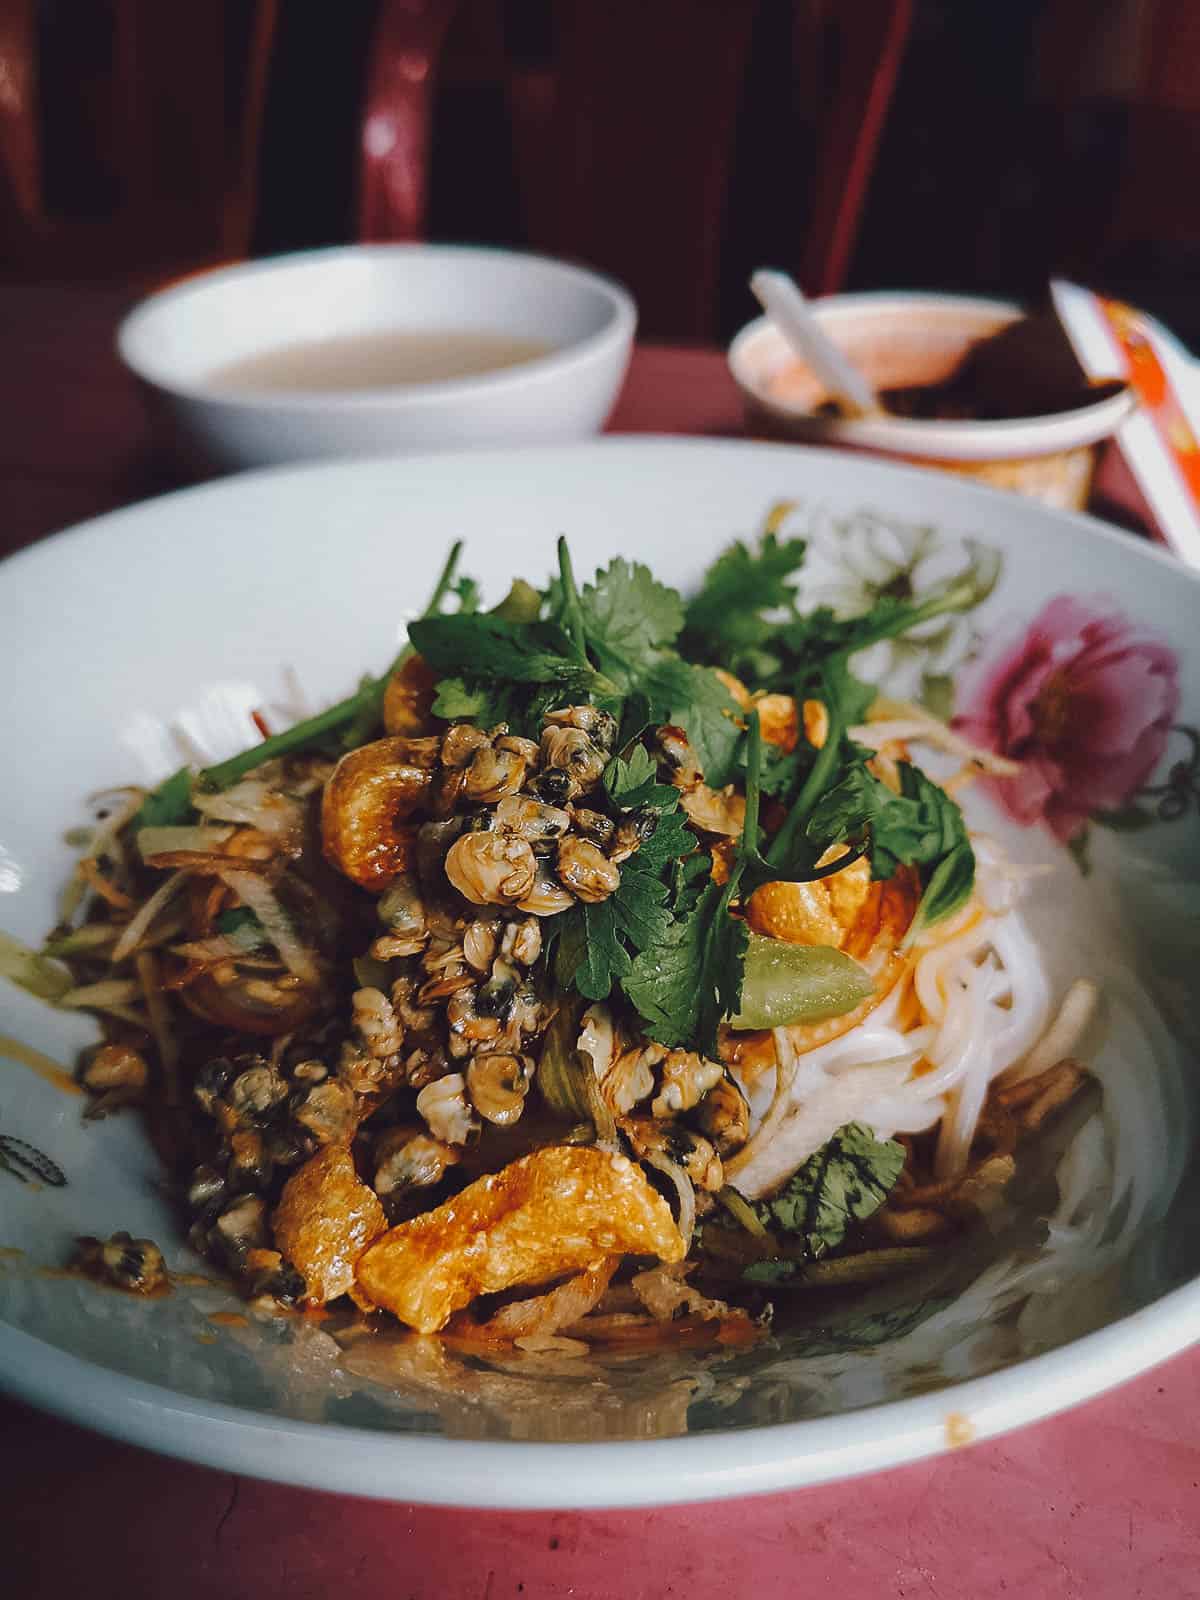 Bun hen topped with peanuts and banana flower salad at a restaurant in Hue